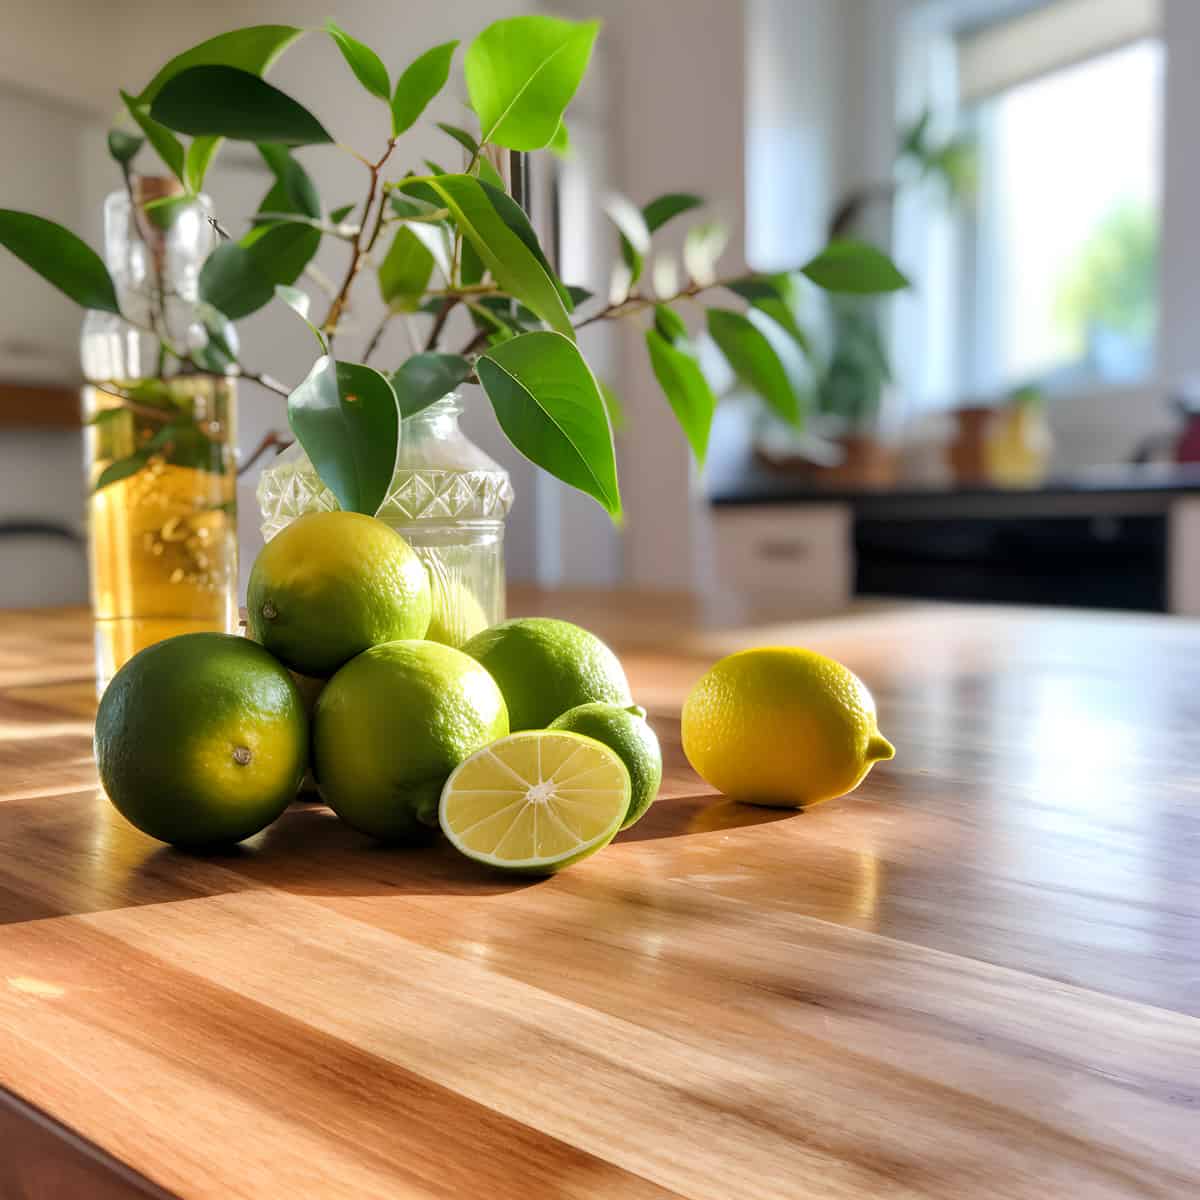 Limequat on a kitchen counter